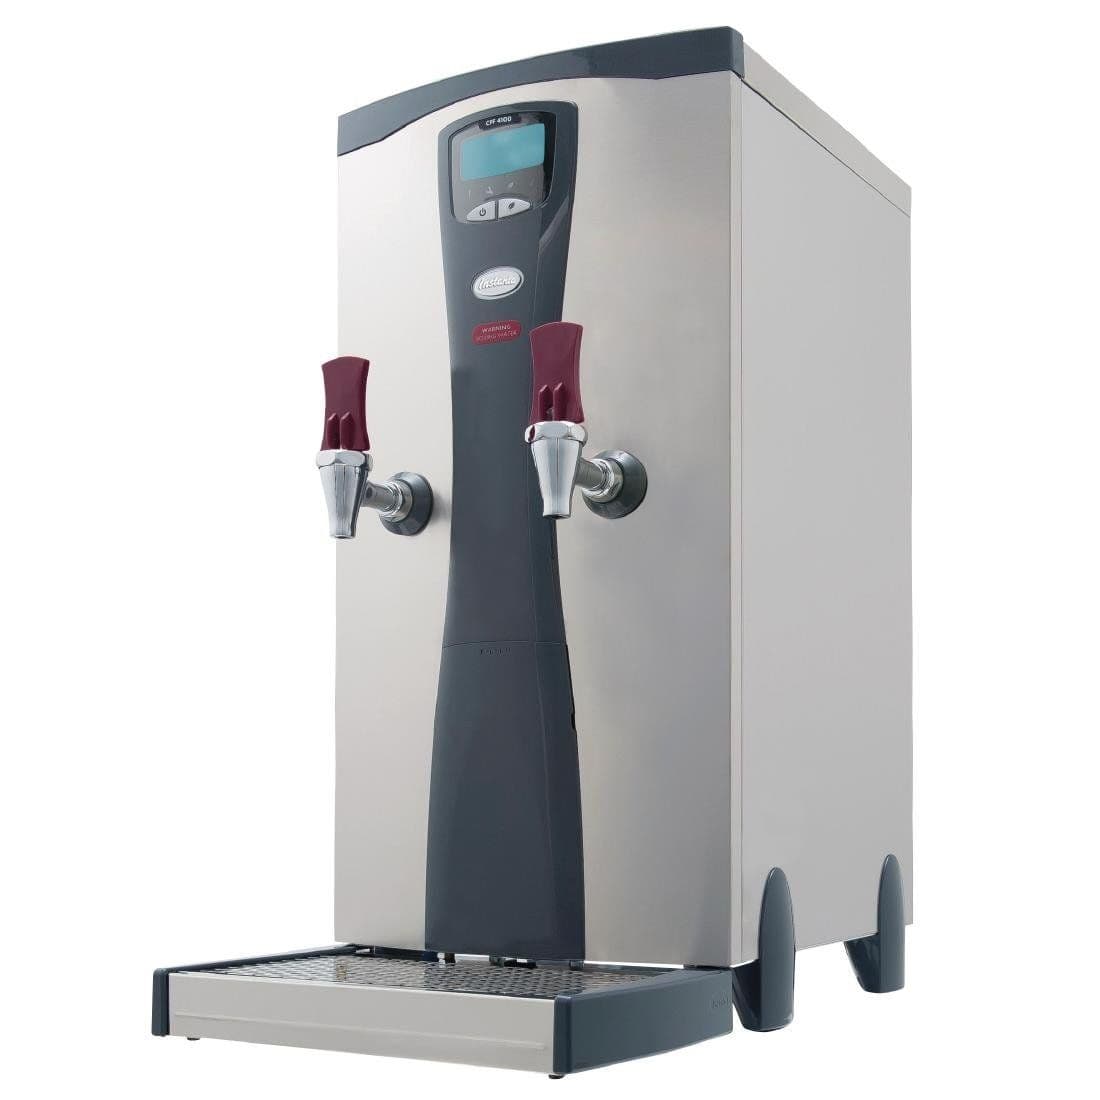 Instanta Premium Countertop Boiler Twin Tap with Built In Filtration 6kW CPF520-6 JD Catering Equipment Solutions Ltd